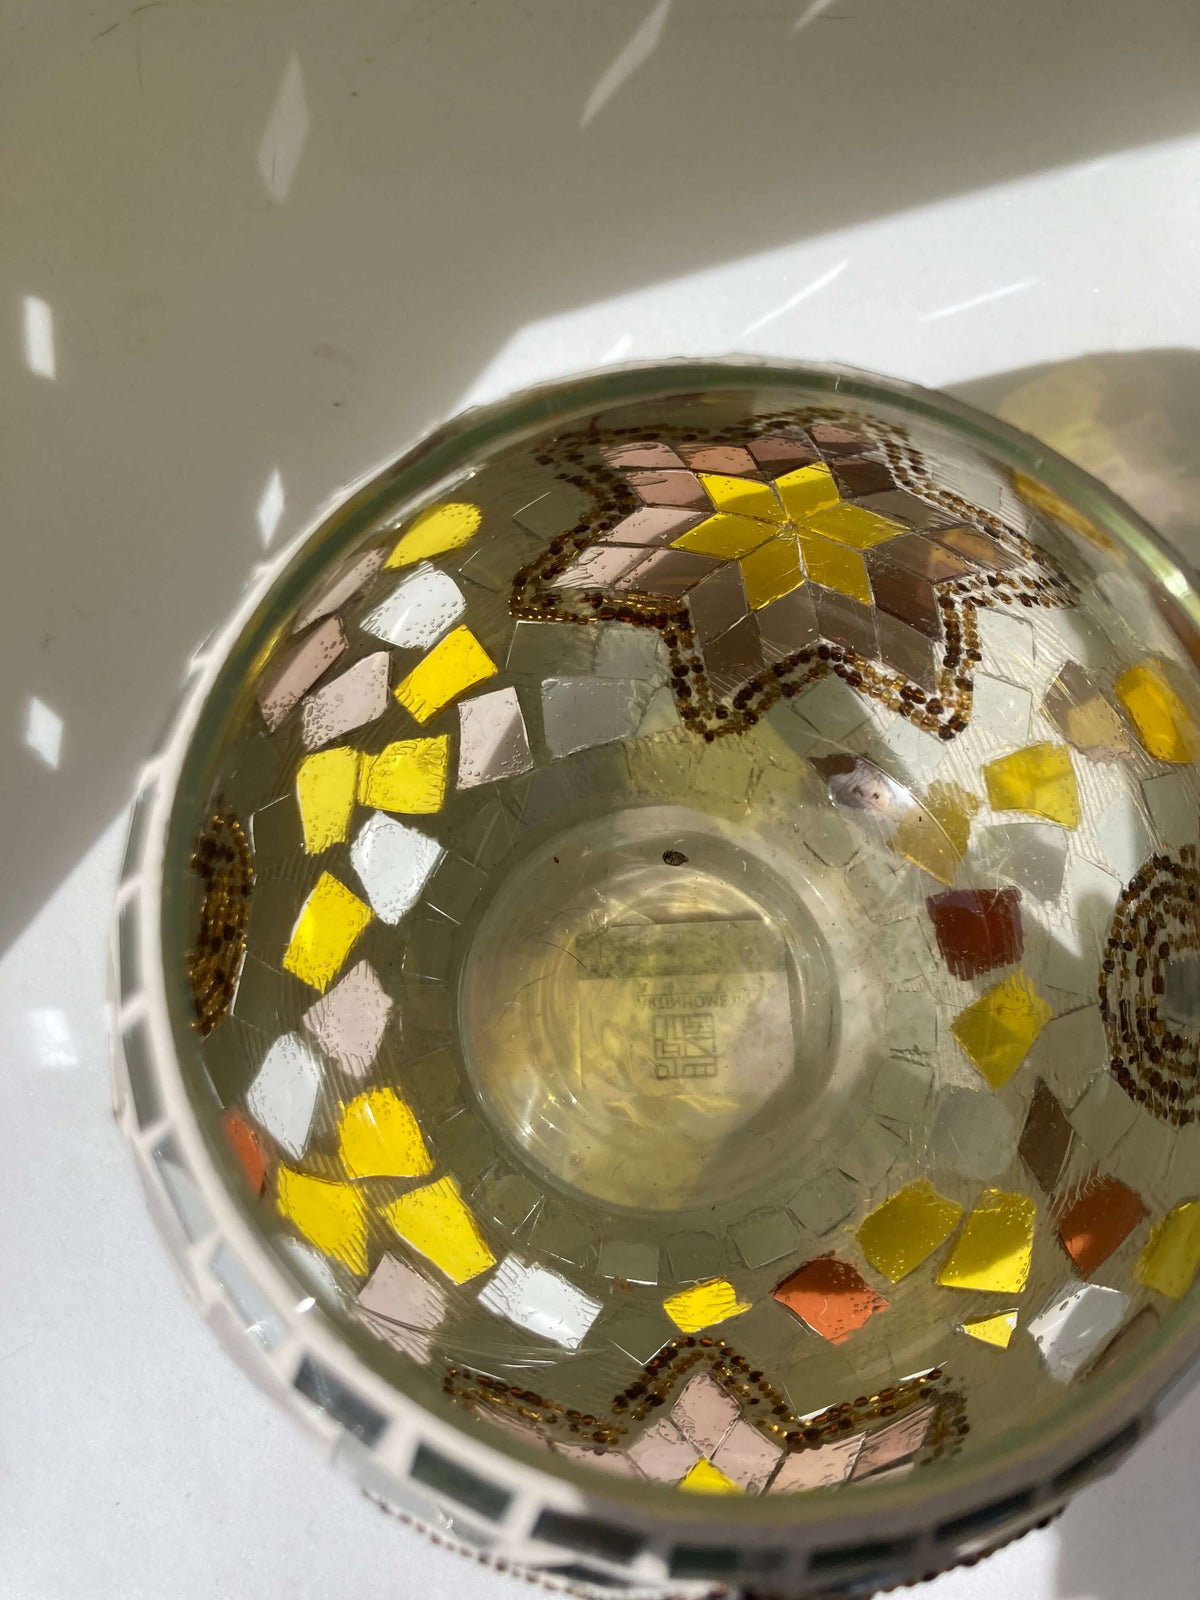 Mosaic Silver and Brown Circle and Star Candle Holder